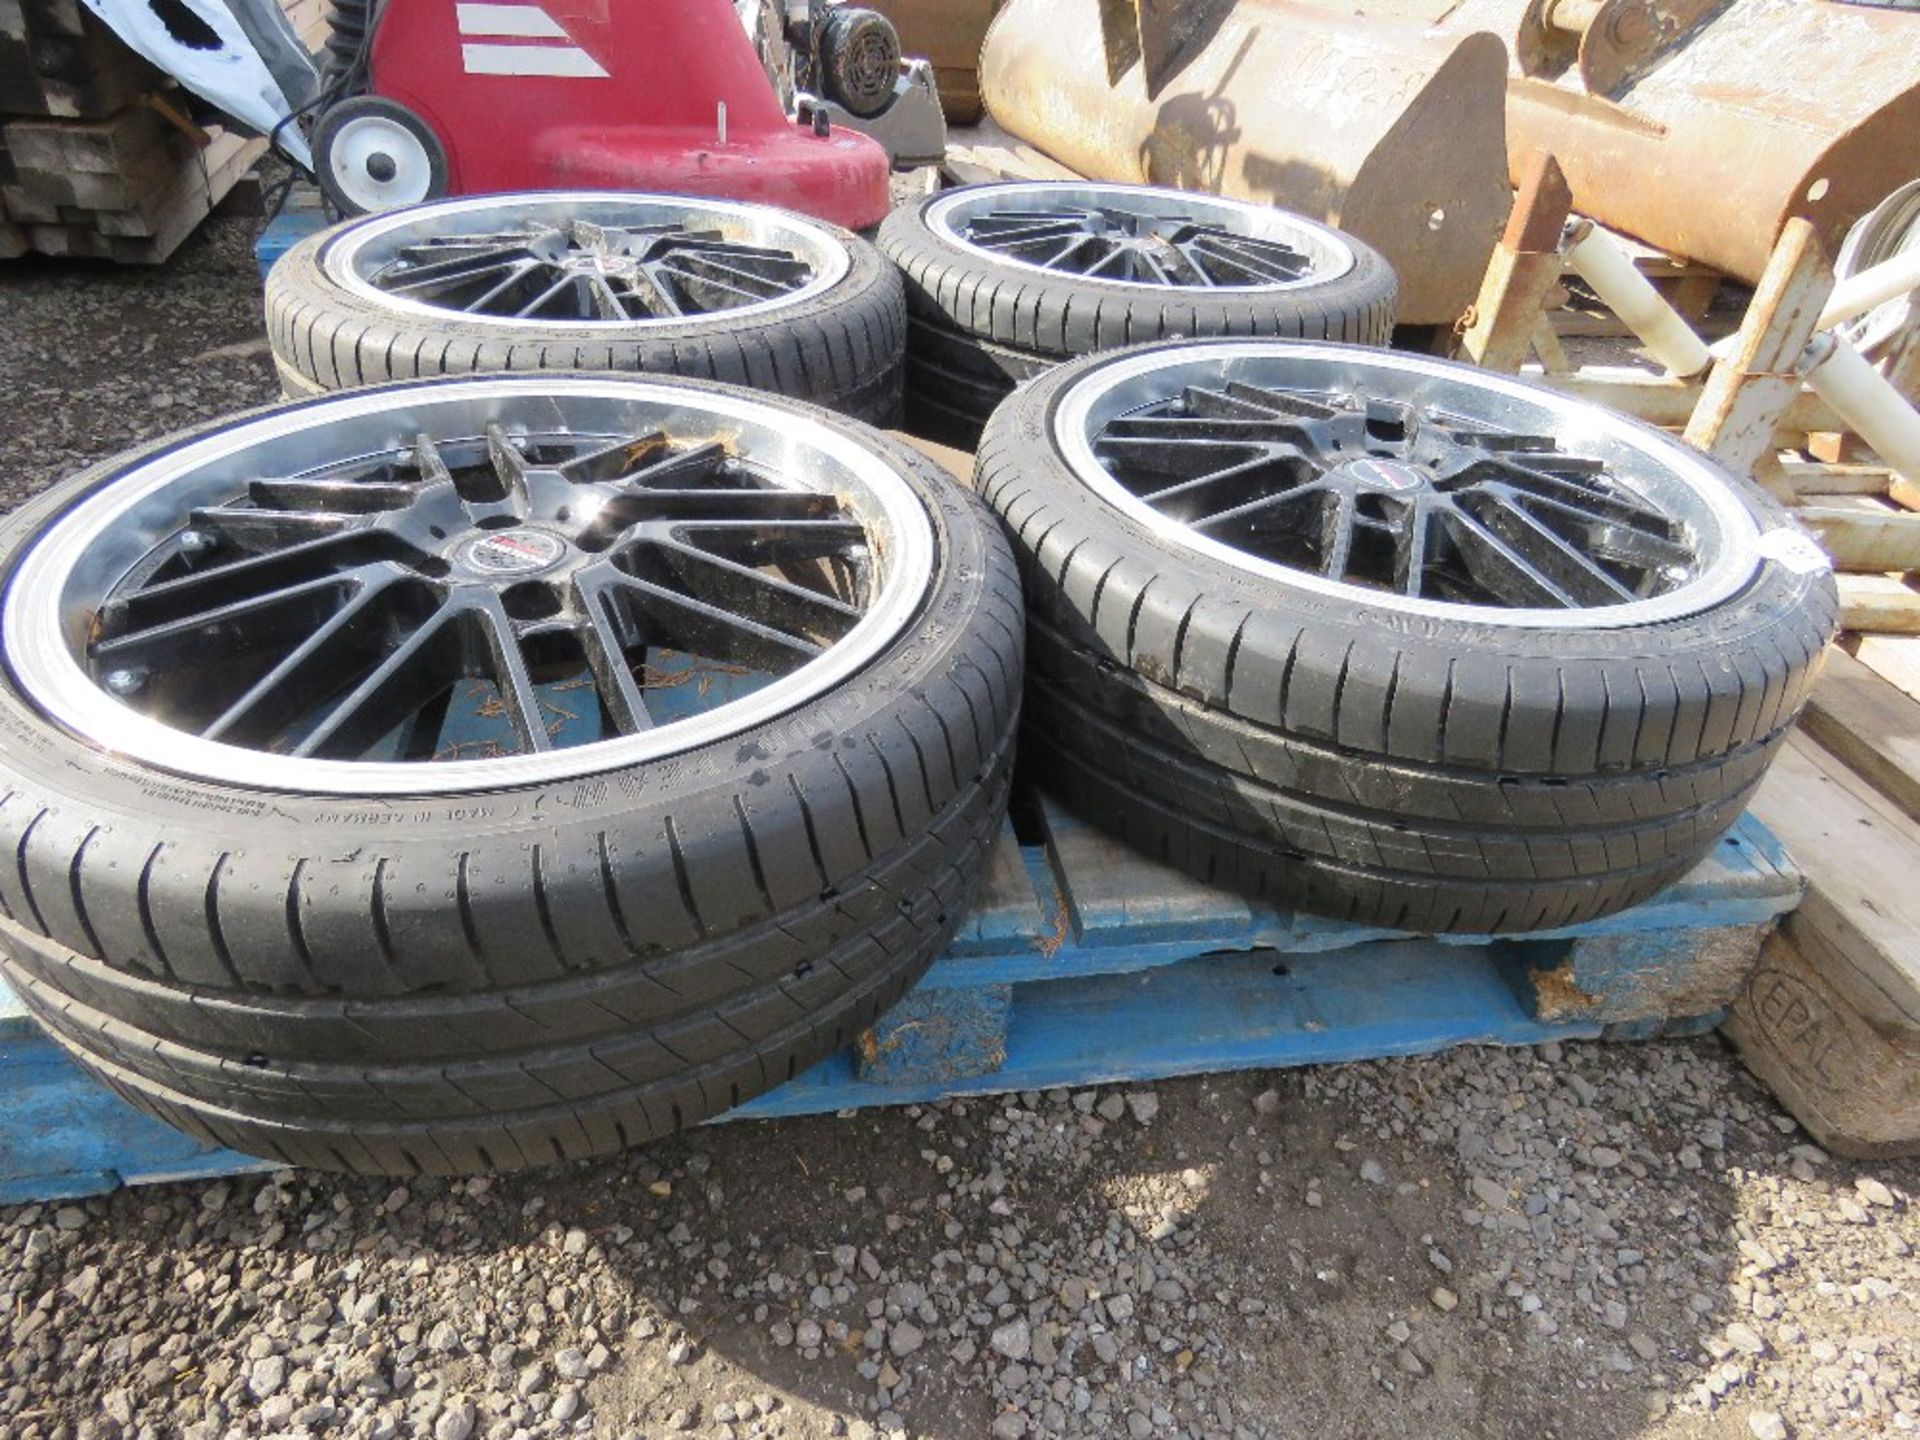 SET OF 4 195-40R17 ALLOY WHEELS AND TYRES WITH NUTS, SUITABLE FOR FIESTA?? THIS LOT IS SOLD UNDE - Image 2 of 4